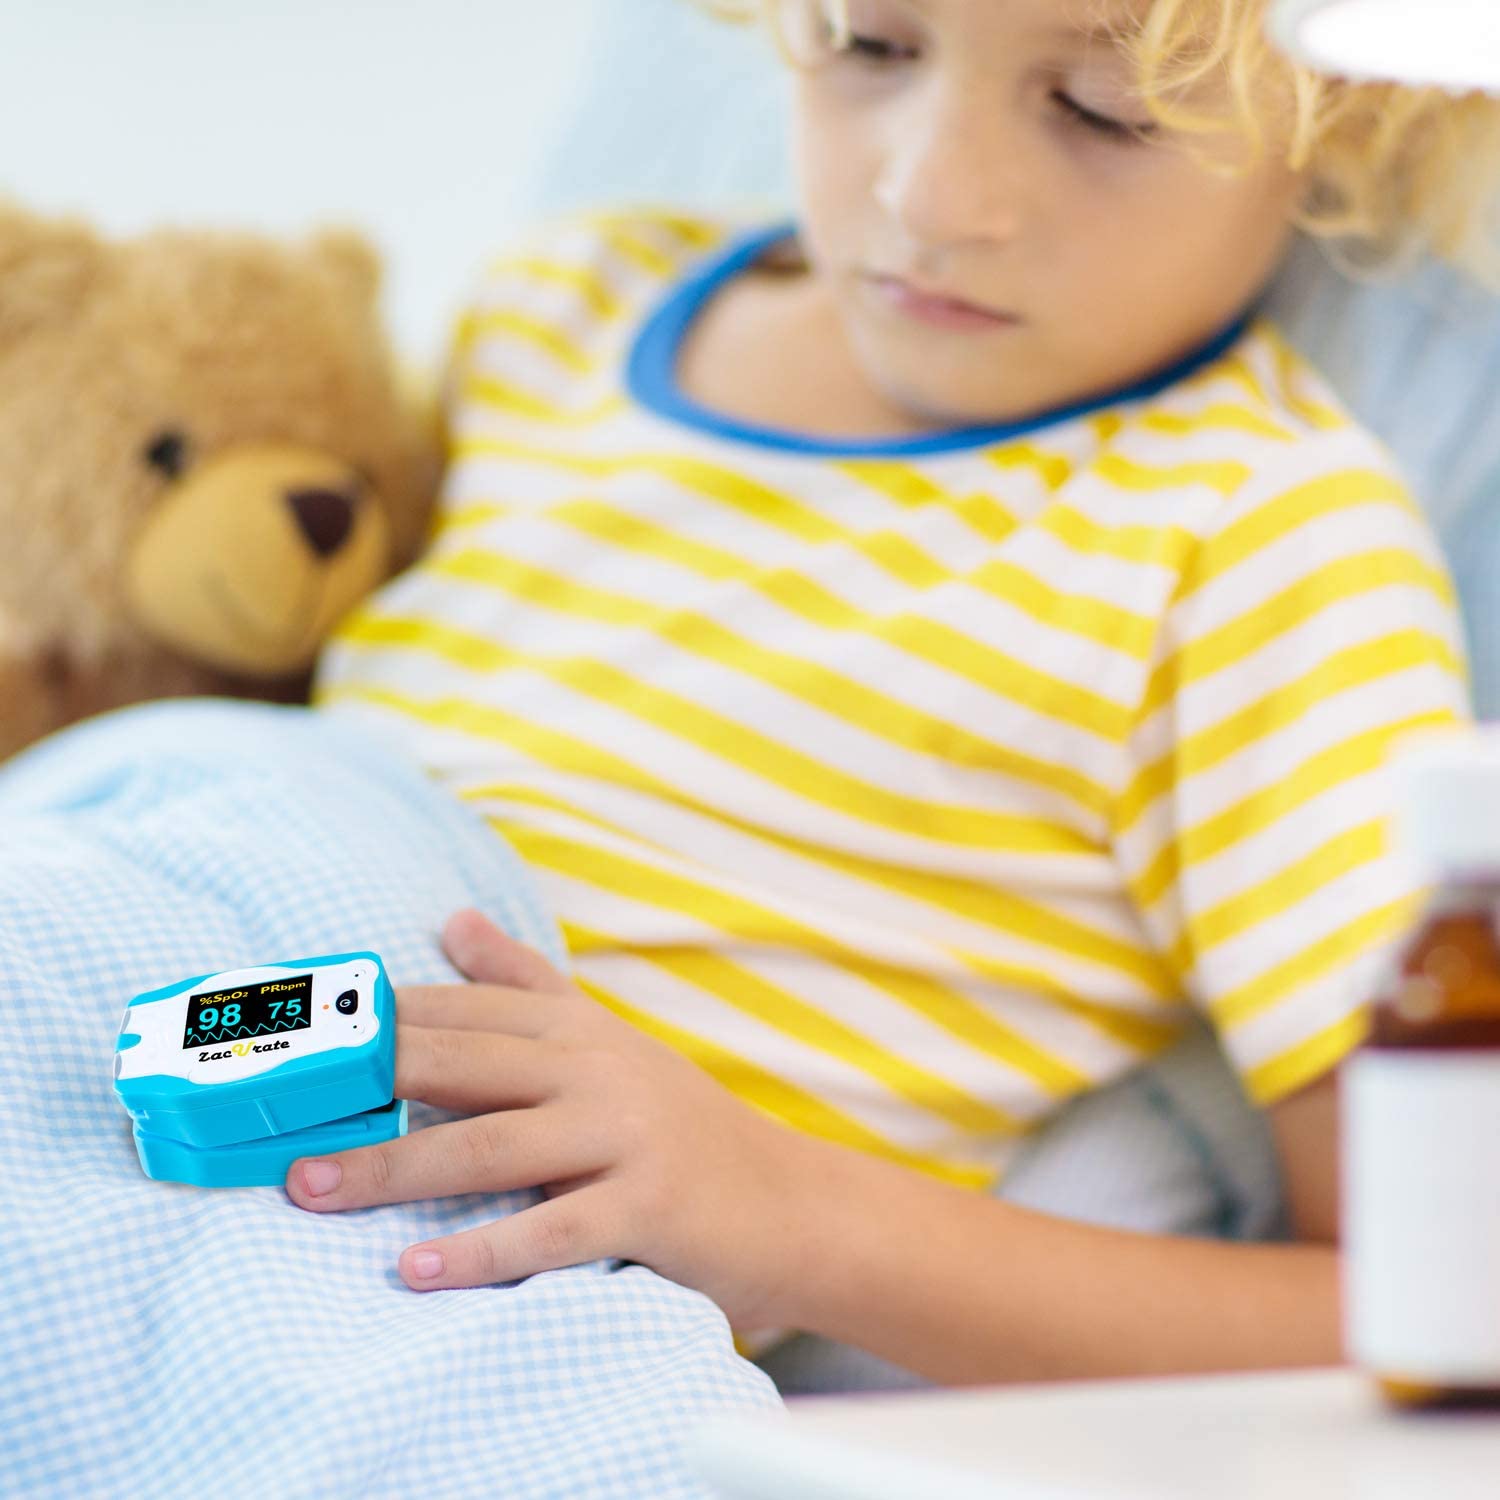 A child on the bed with the Zacurate Children Pulse Oximeter on his finger 